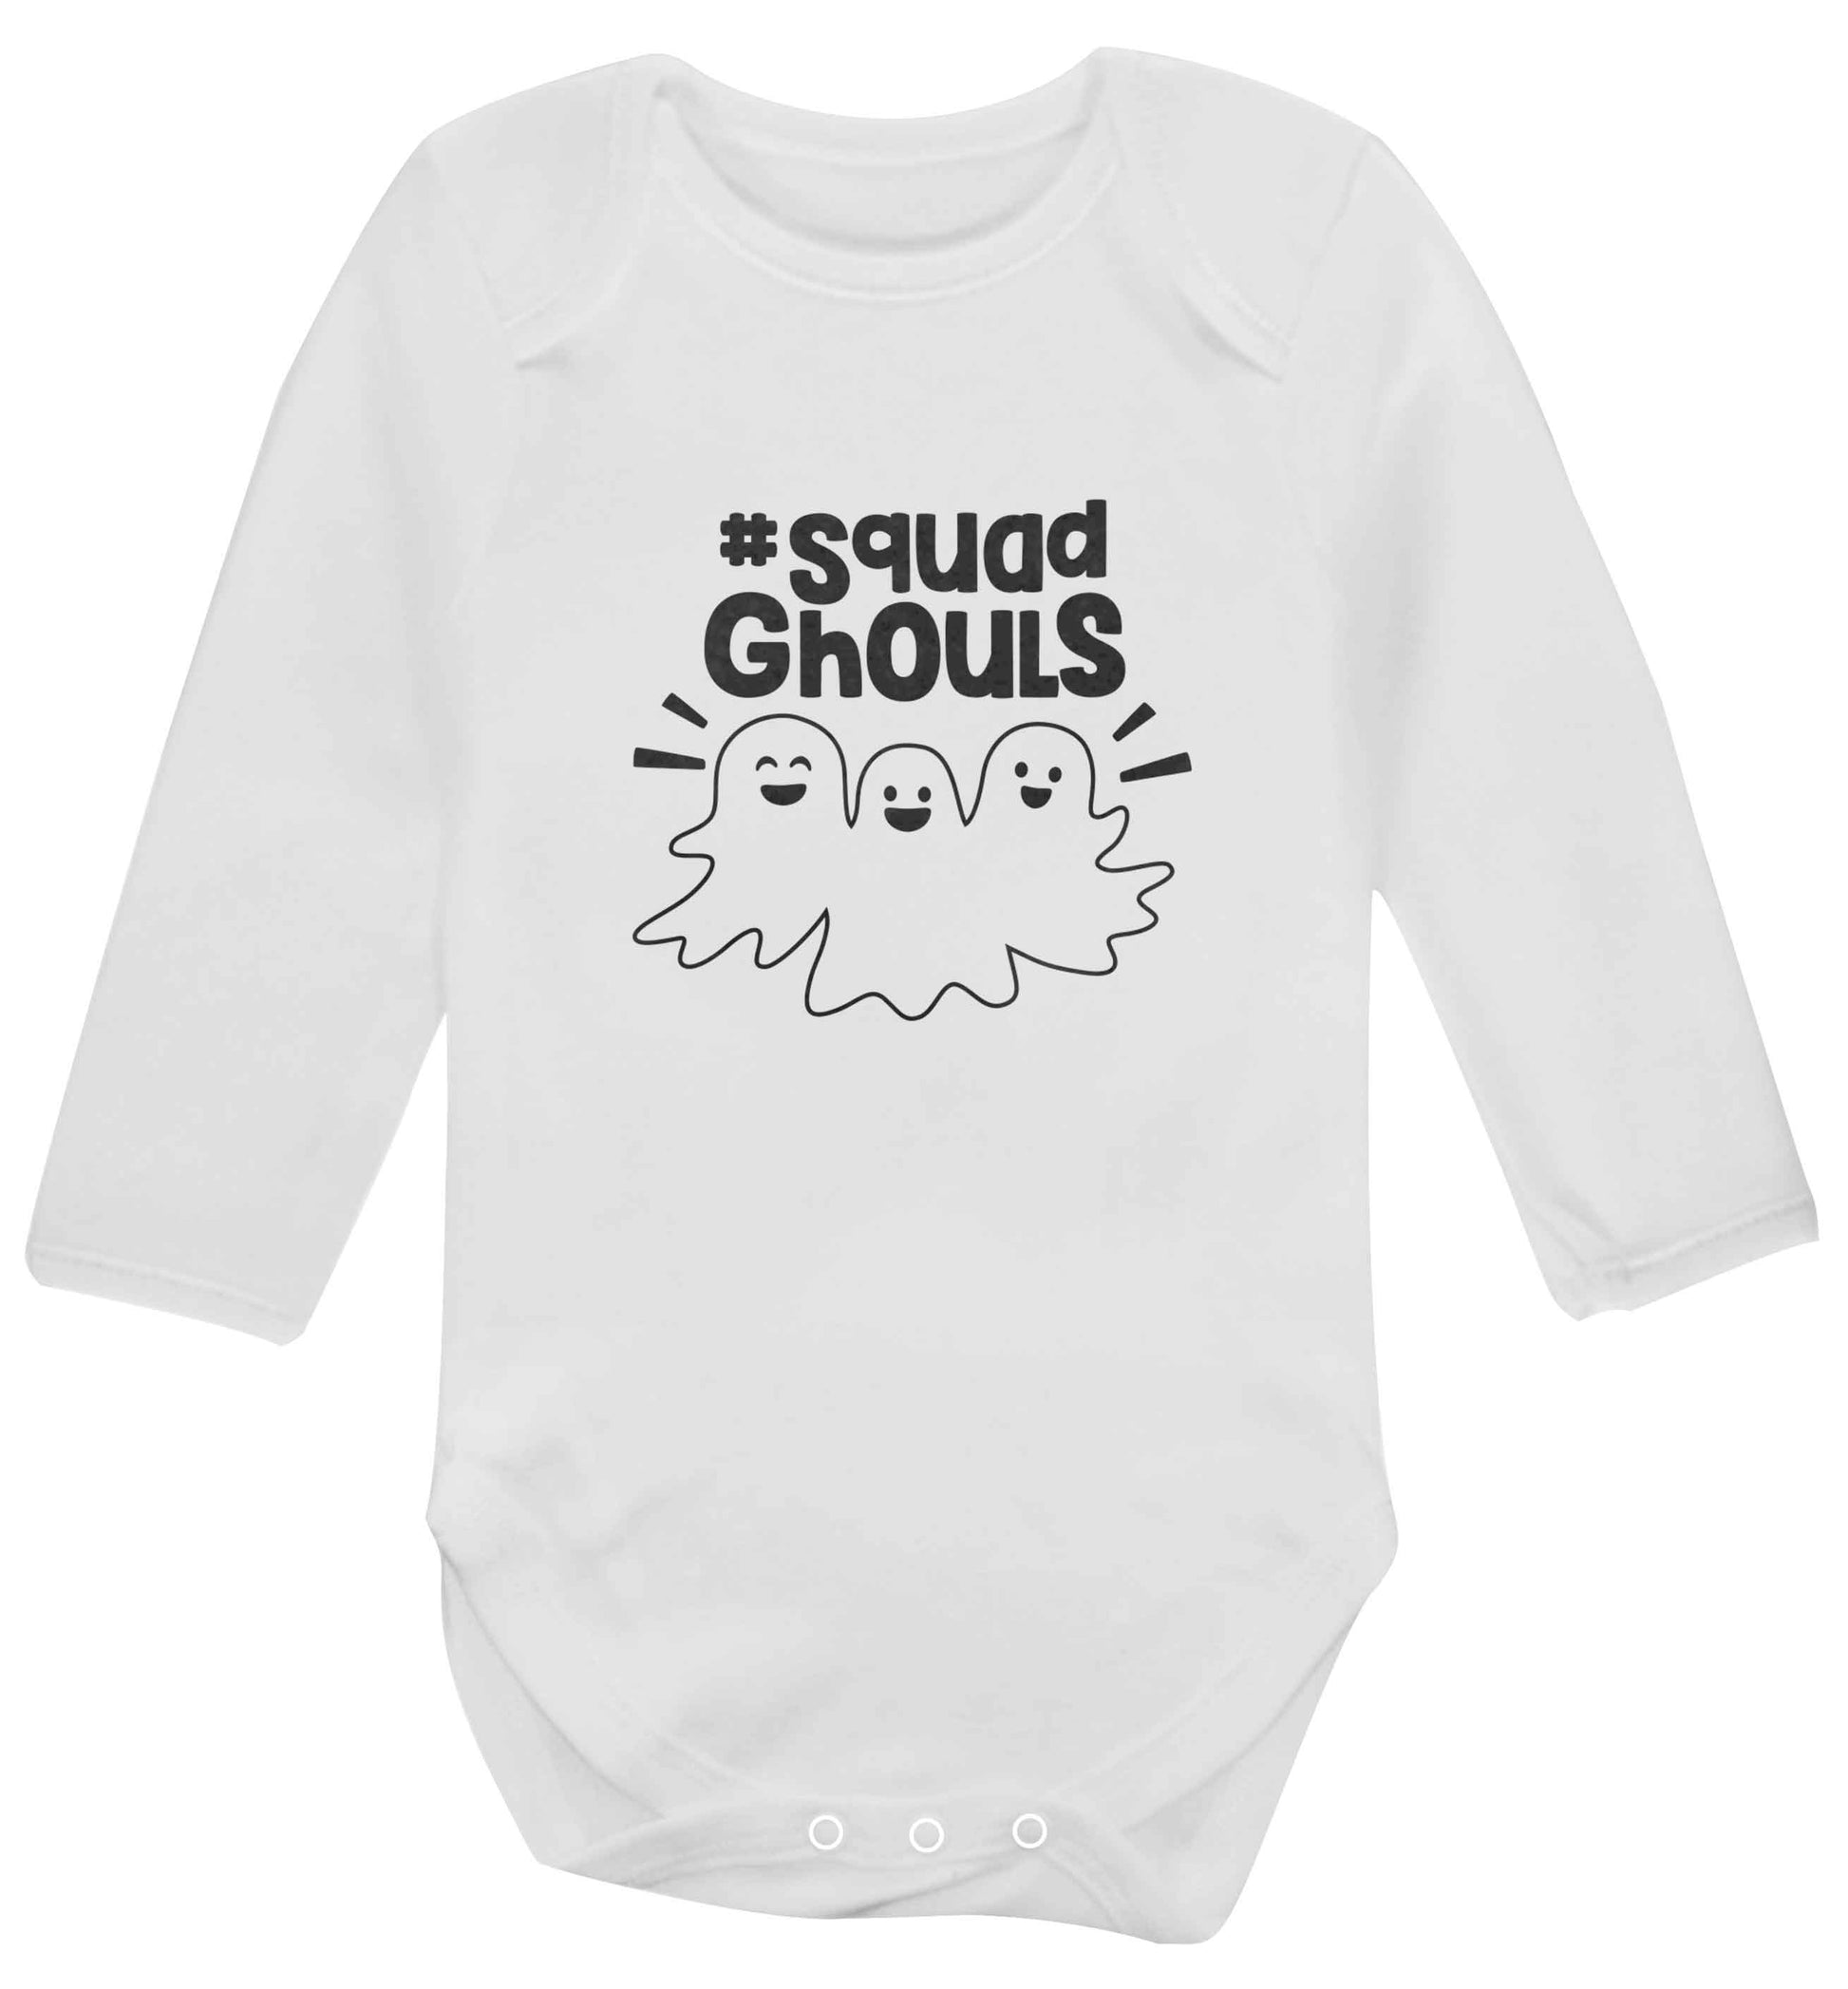 Squad ghouls Kit baby vest long sleeved white 6-12 months